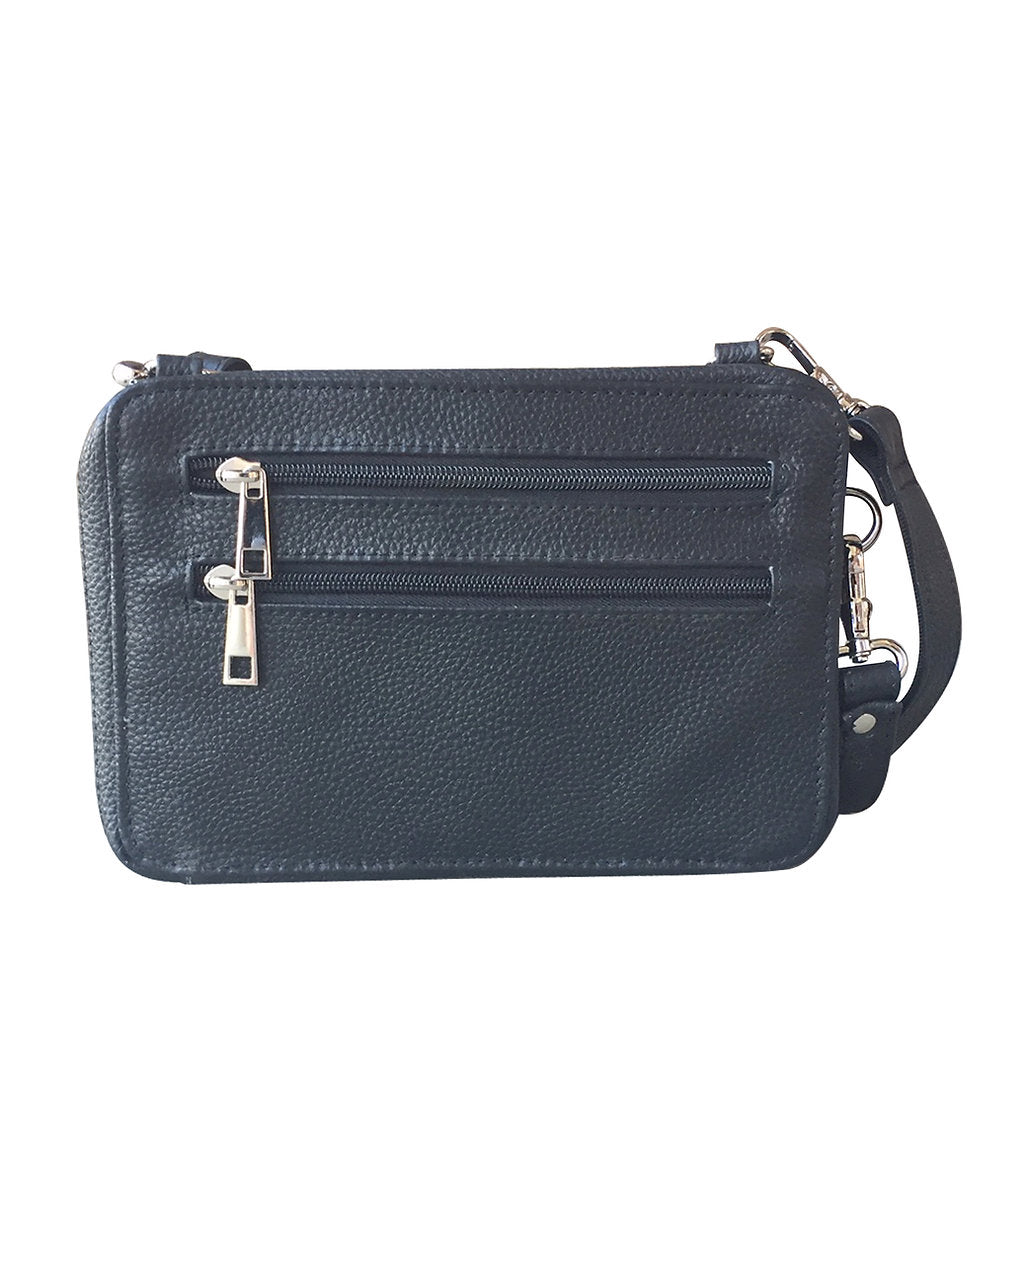 NEW Dual Compartment Leather Conceal Carry Wristlet to Crossbody Organizer - Hiding Hilda, LLC